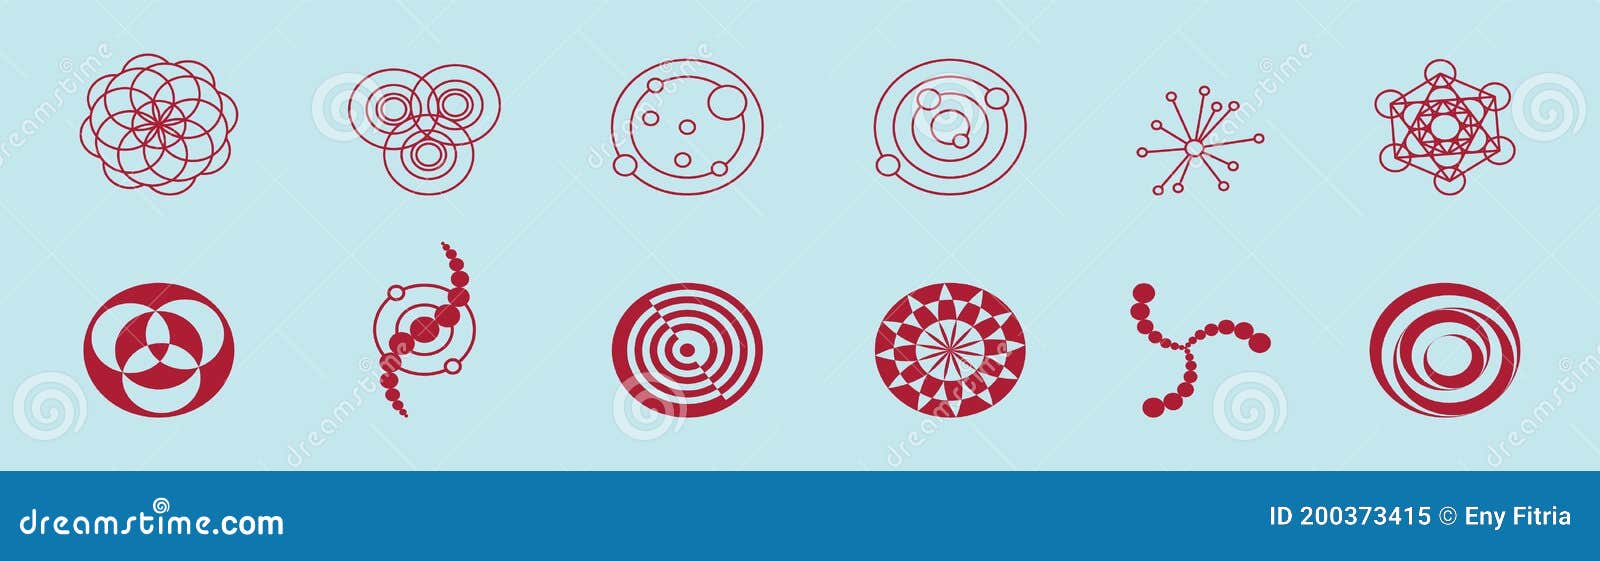 set of crop circles cartoon icon  template with various models.    on blue background